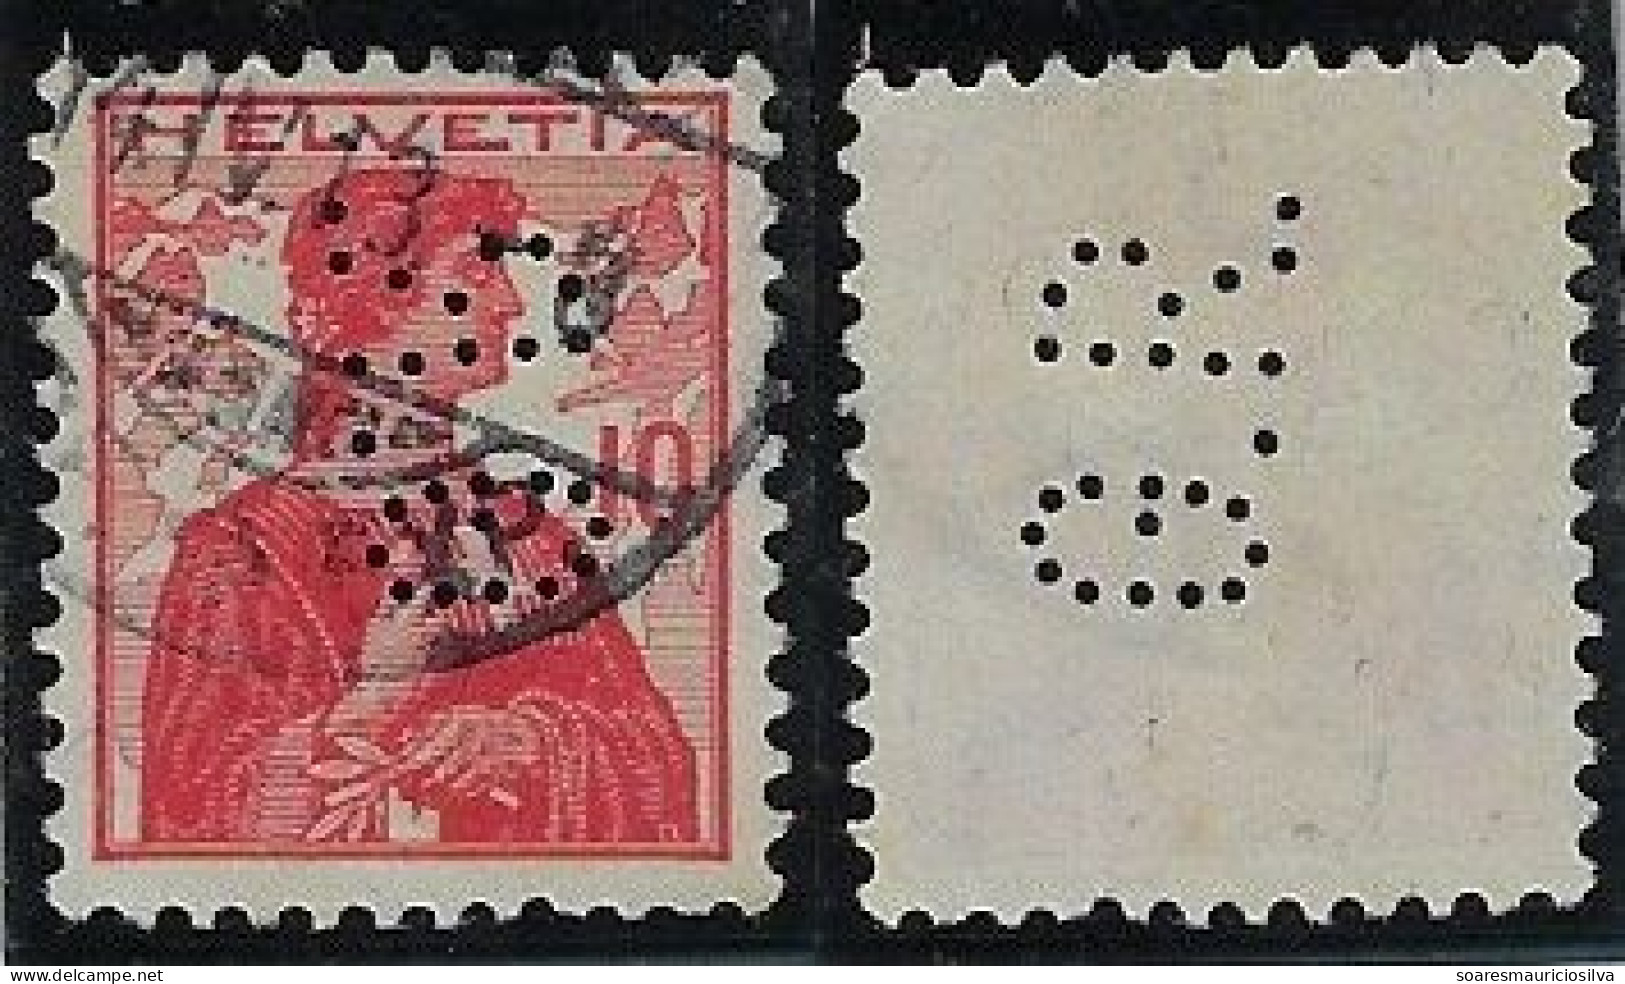 Switzerland 1895/1932 Stamp With Perfin G.R. By Gebrüder Röchling AG Iron And Steel From Basel Lochung Perfore - Perforadas